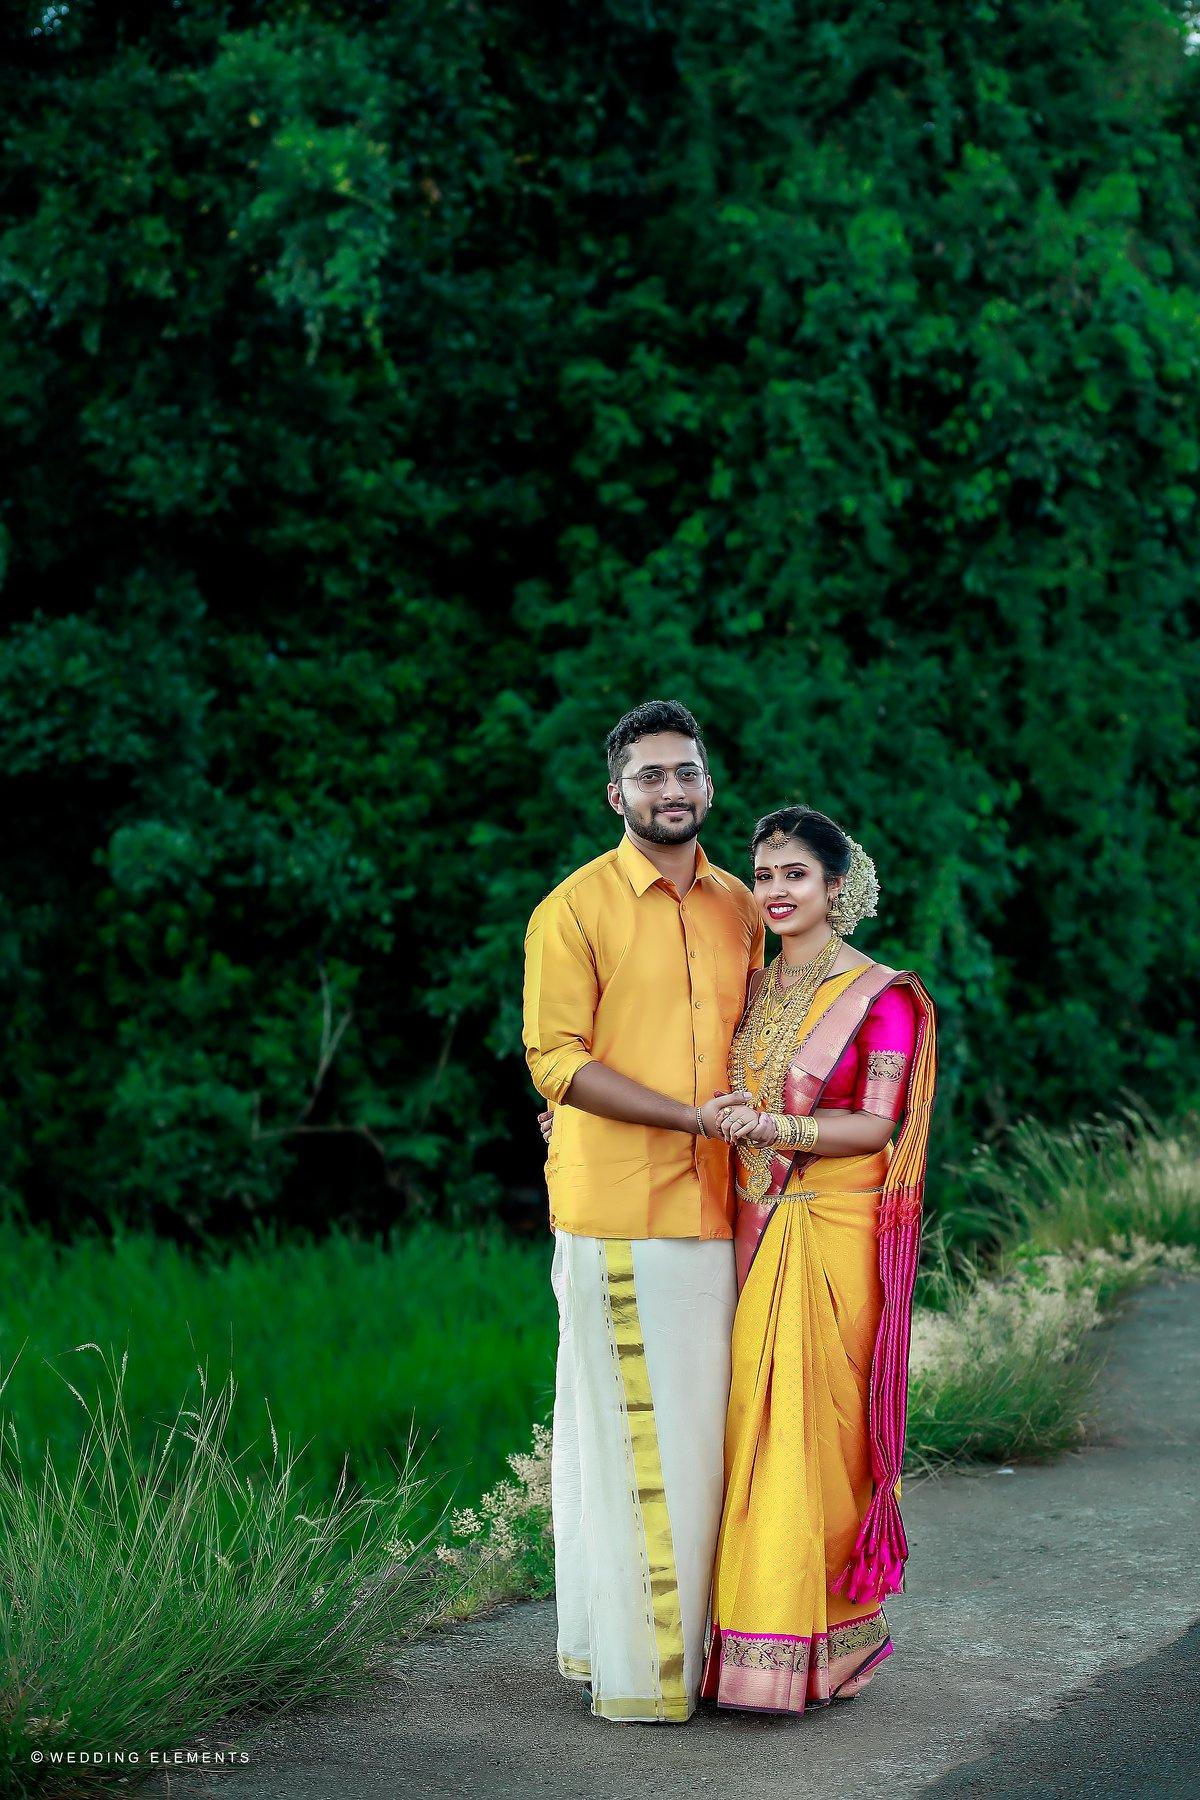 Draped in the warmth of a Kerala wedding | Mommying BabyT